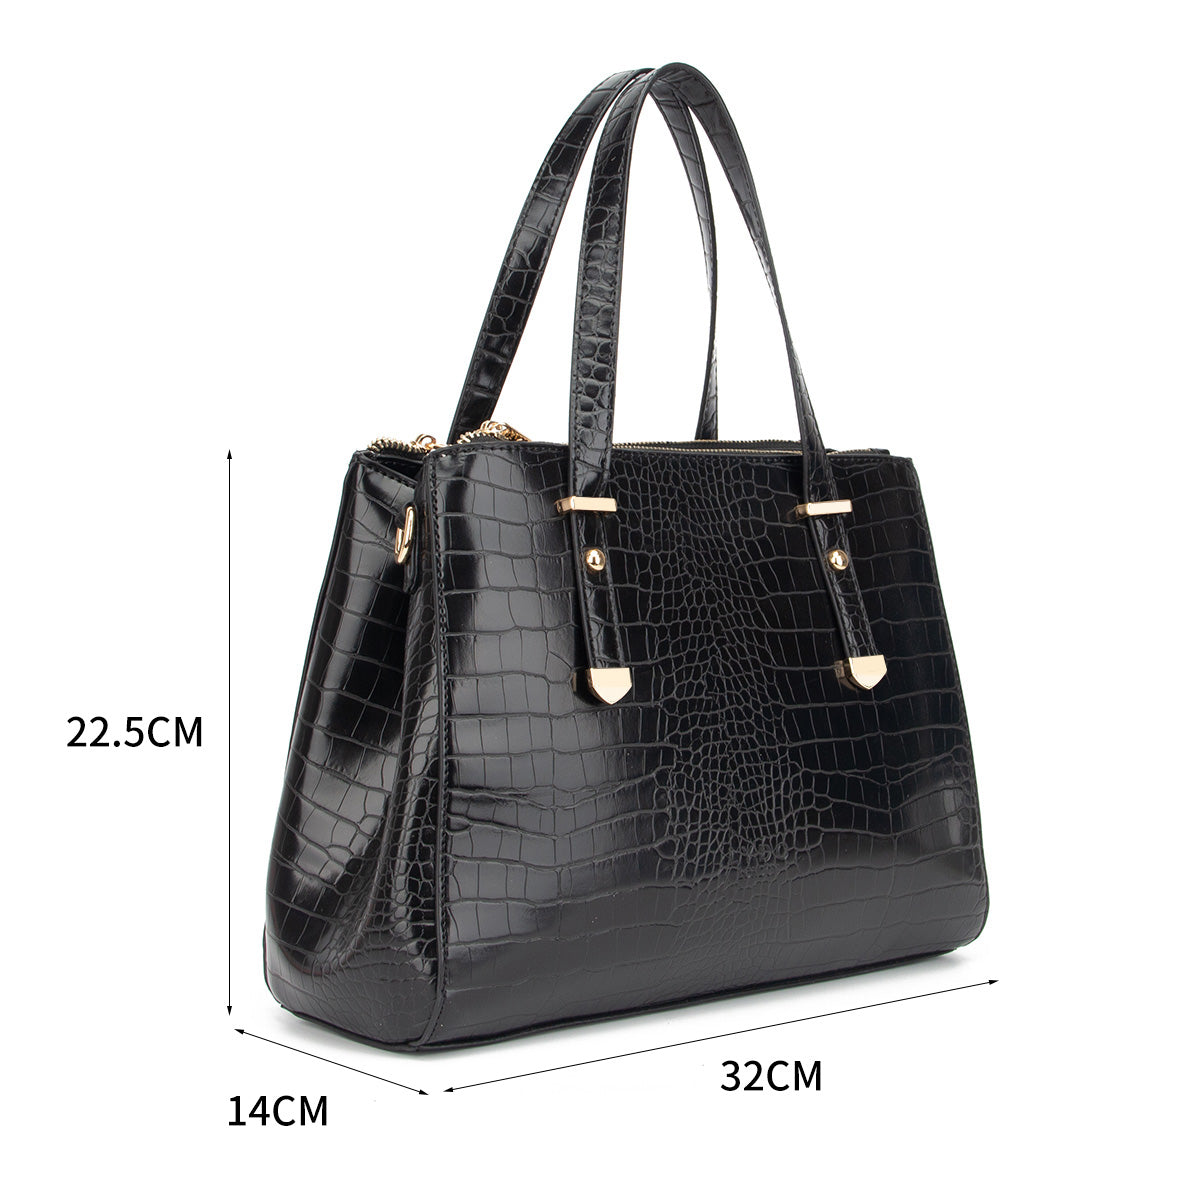 LYDC Large Shoulder Bag Croc Style with Top handles